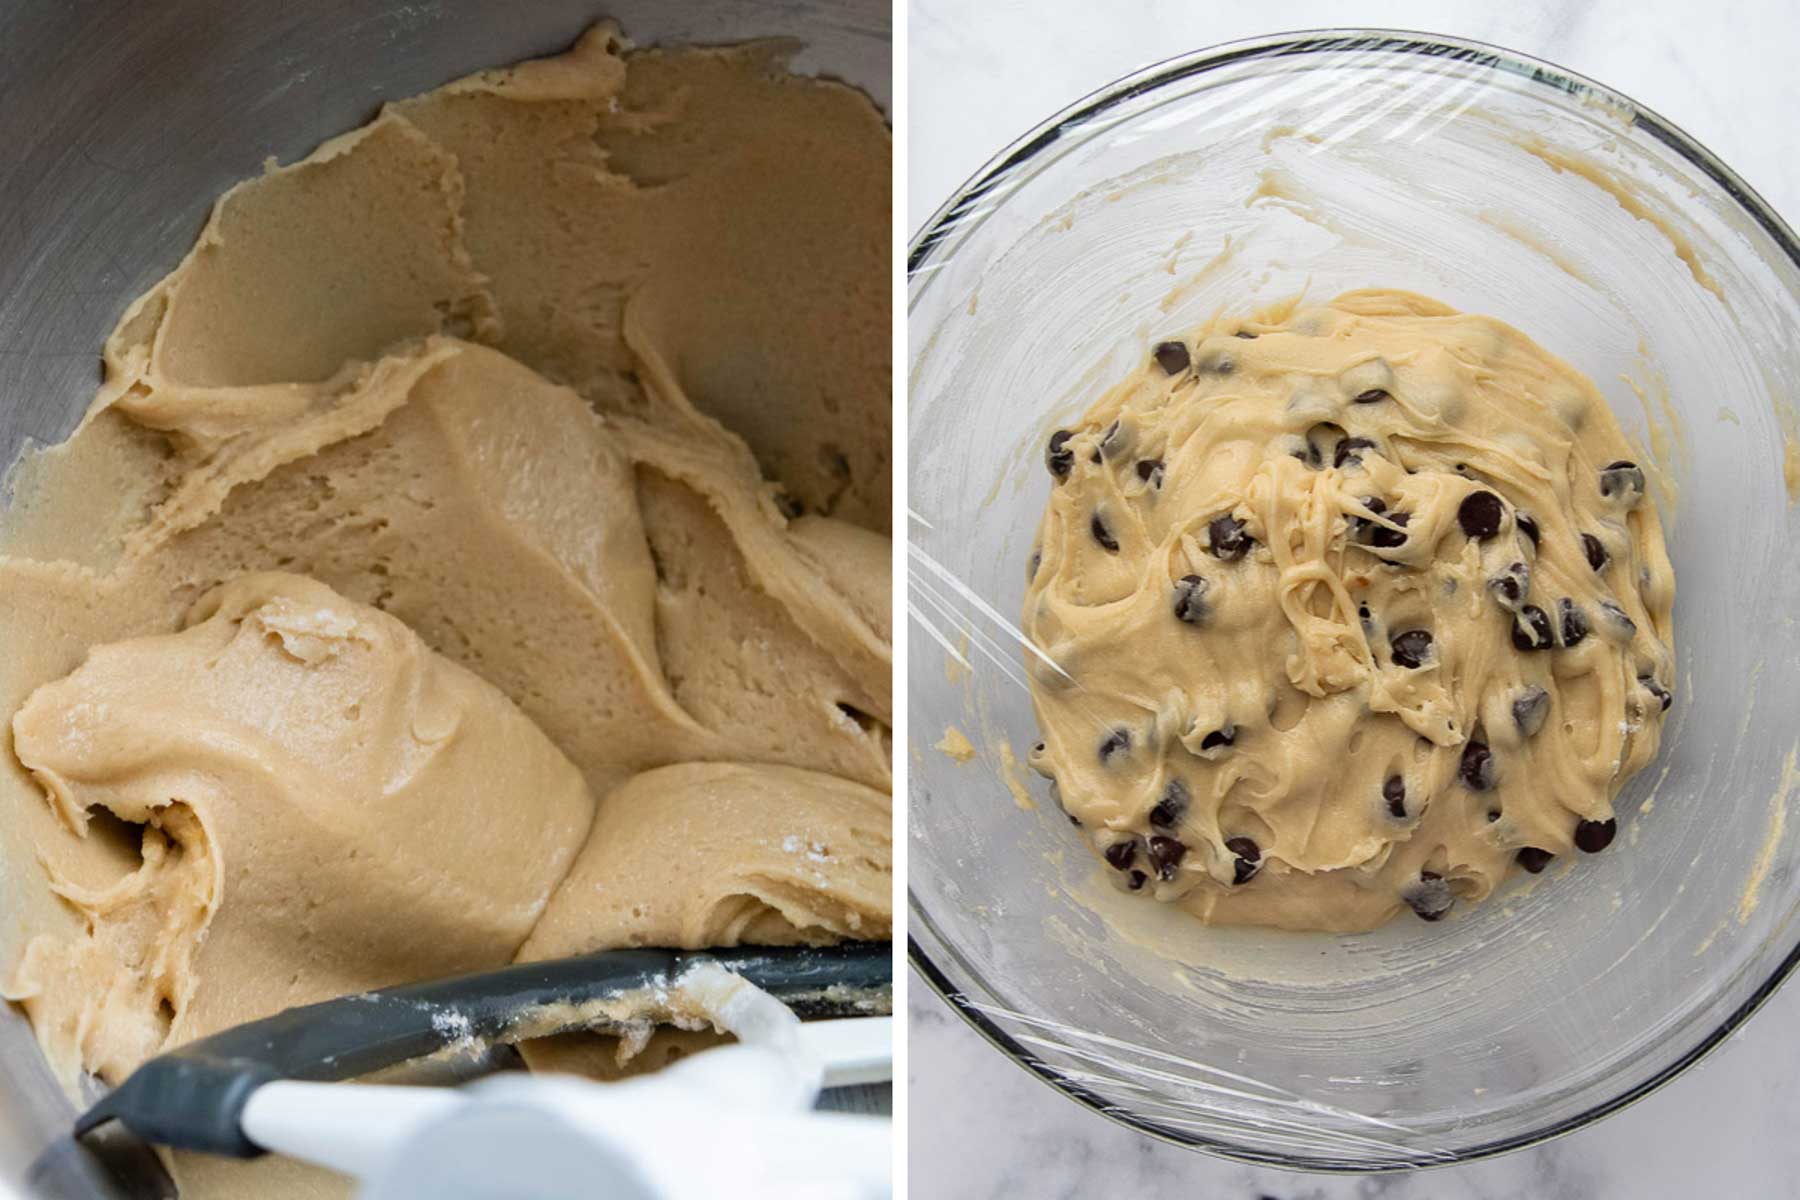 images showing how to make gluten free chocolate chip cookies.